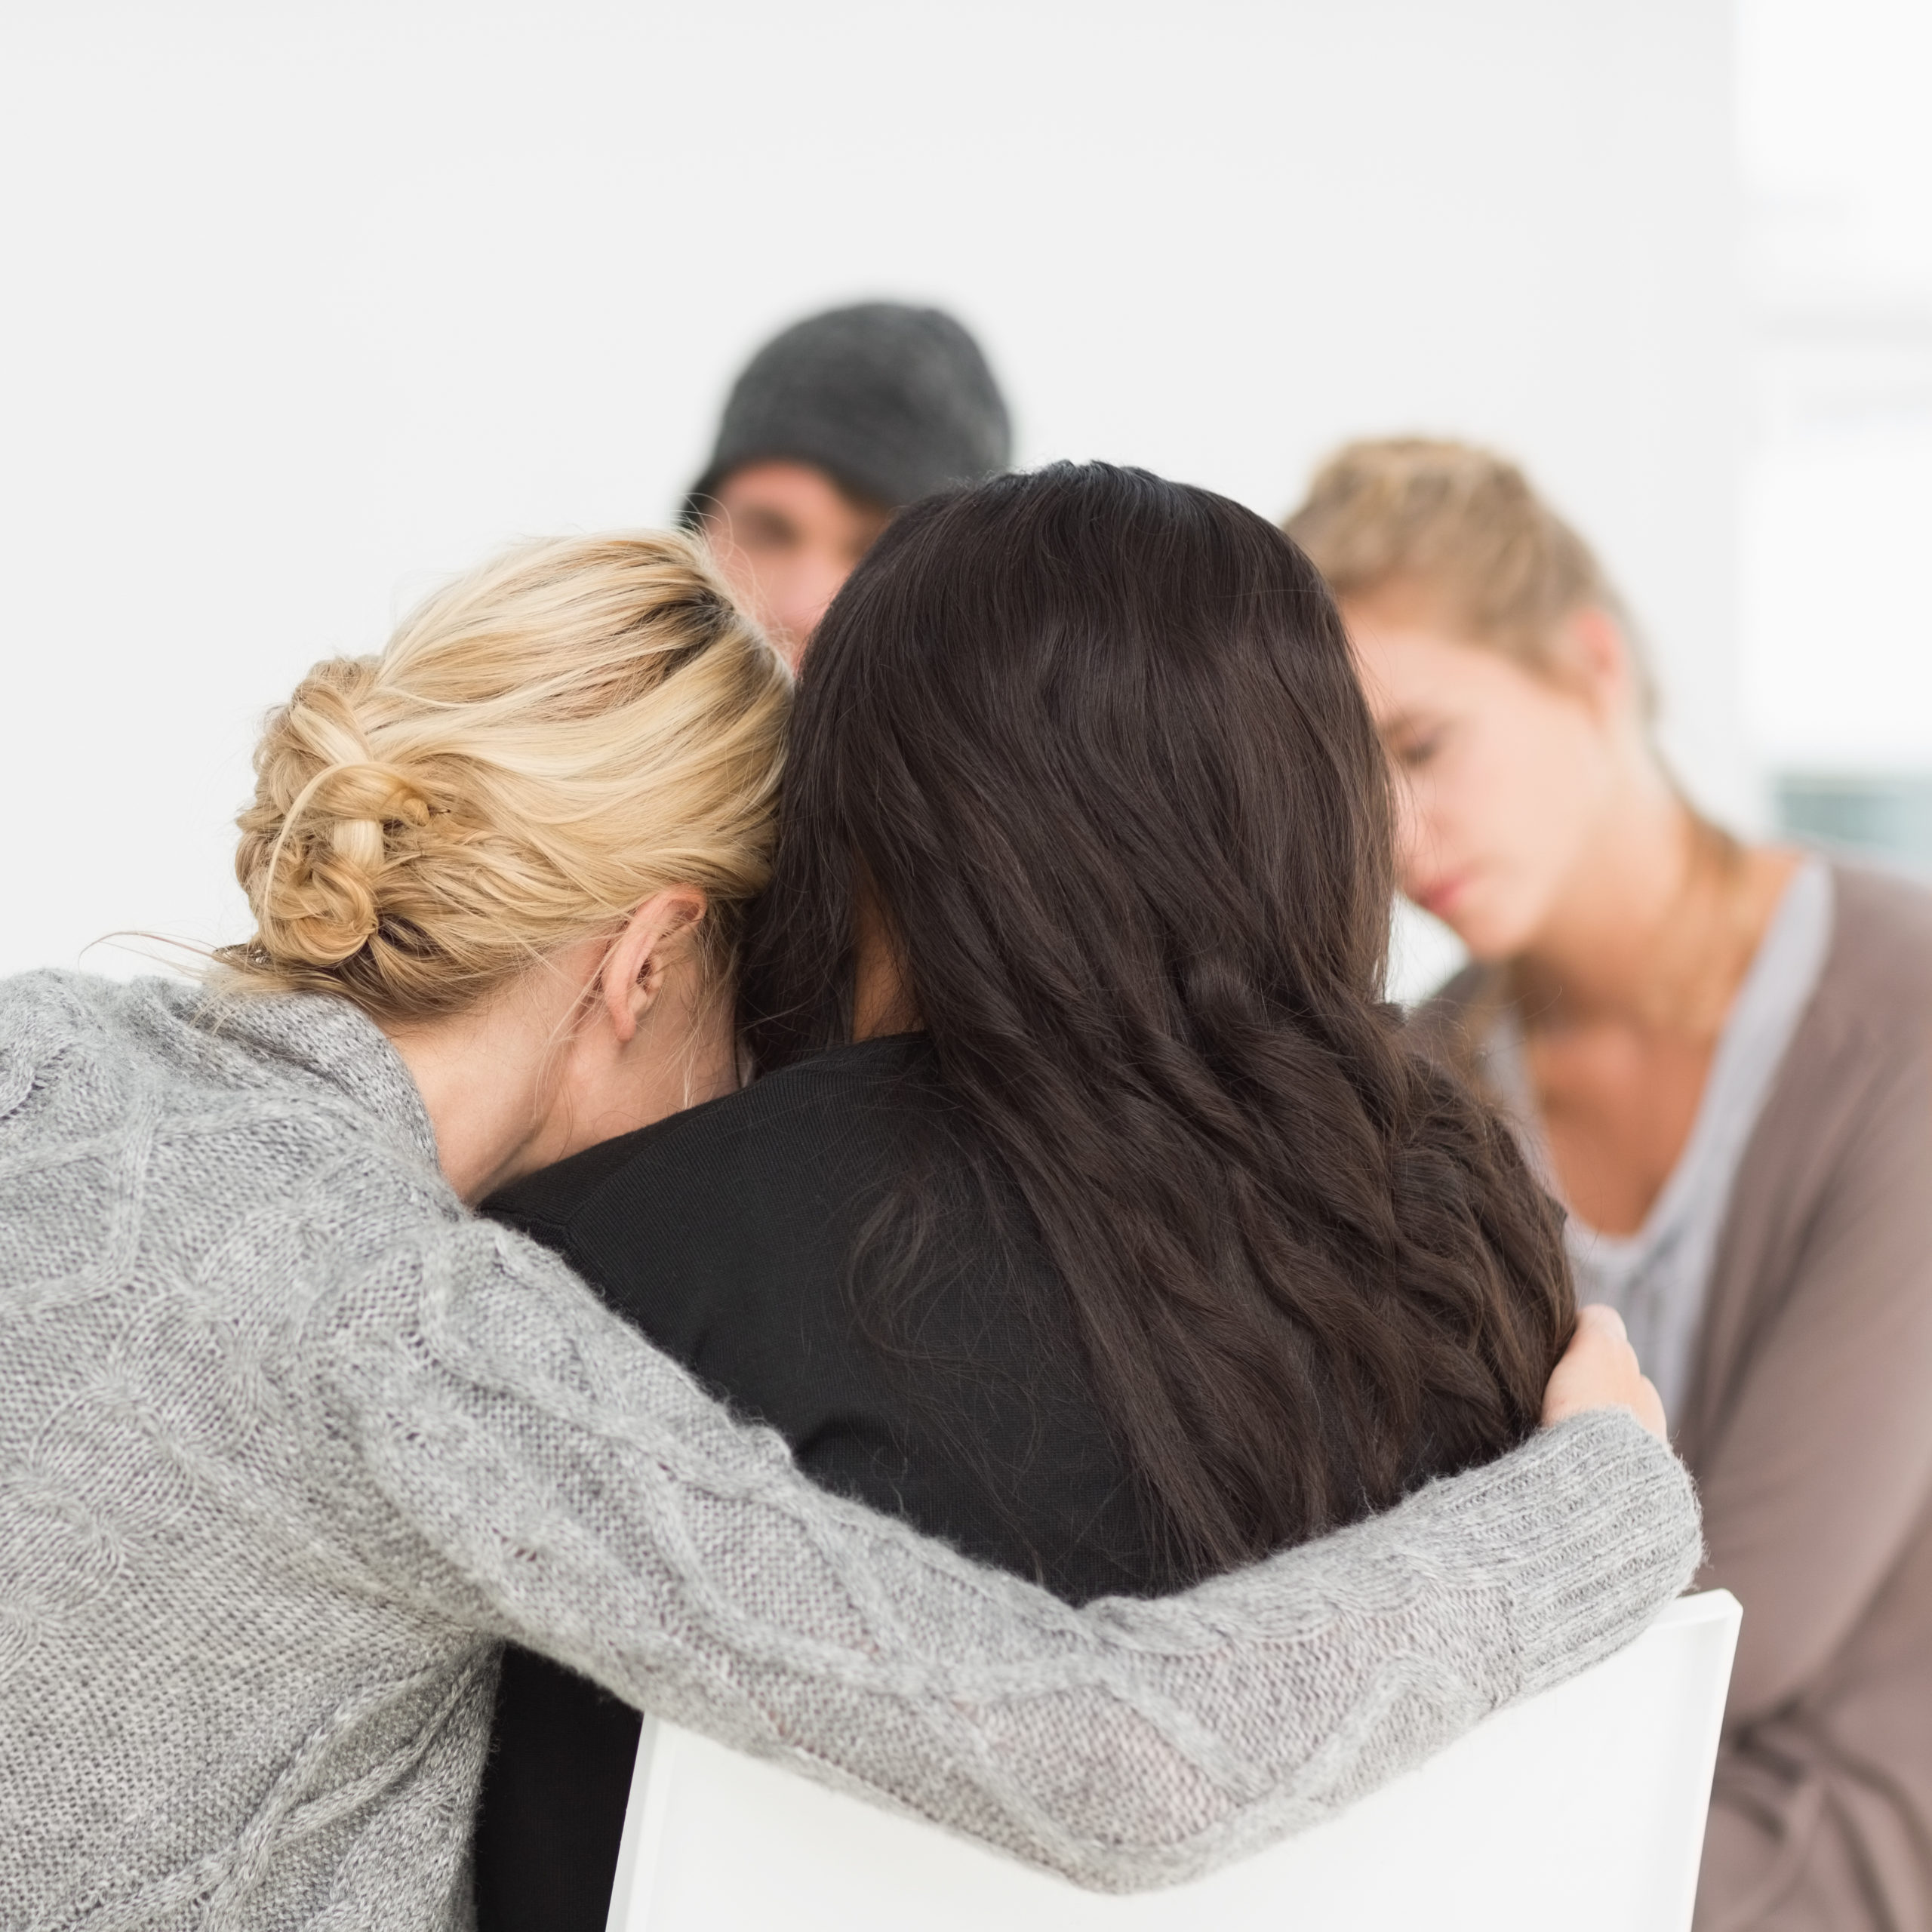 PTSD Treatment and Addiction Treatment in Berlin, NJ. Image - group of people hugging